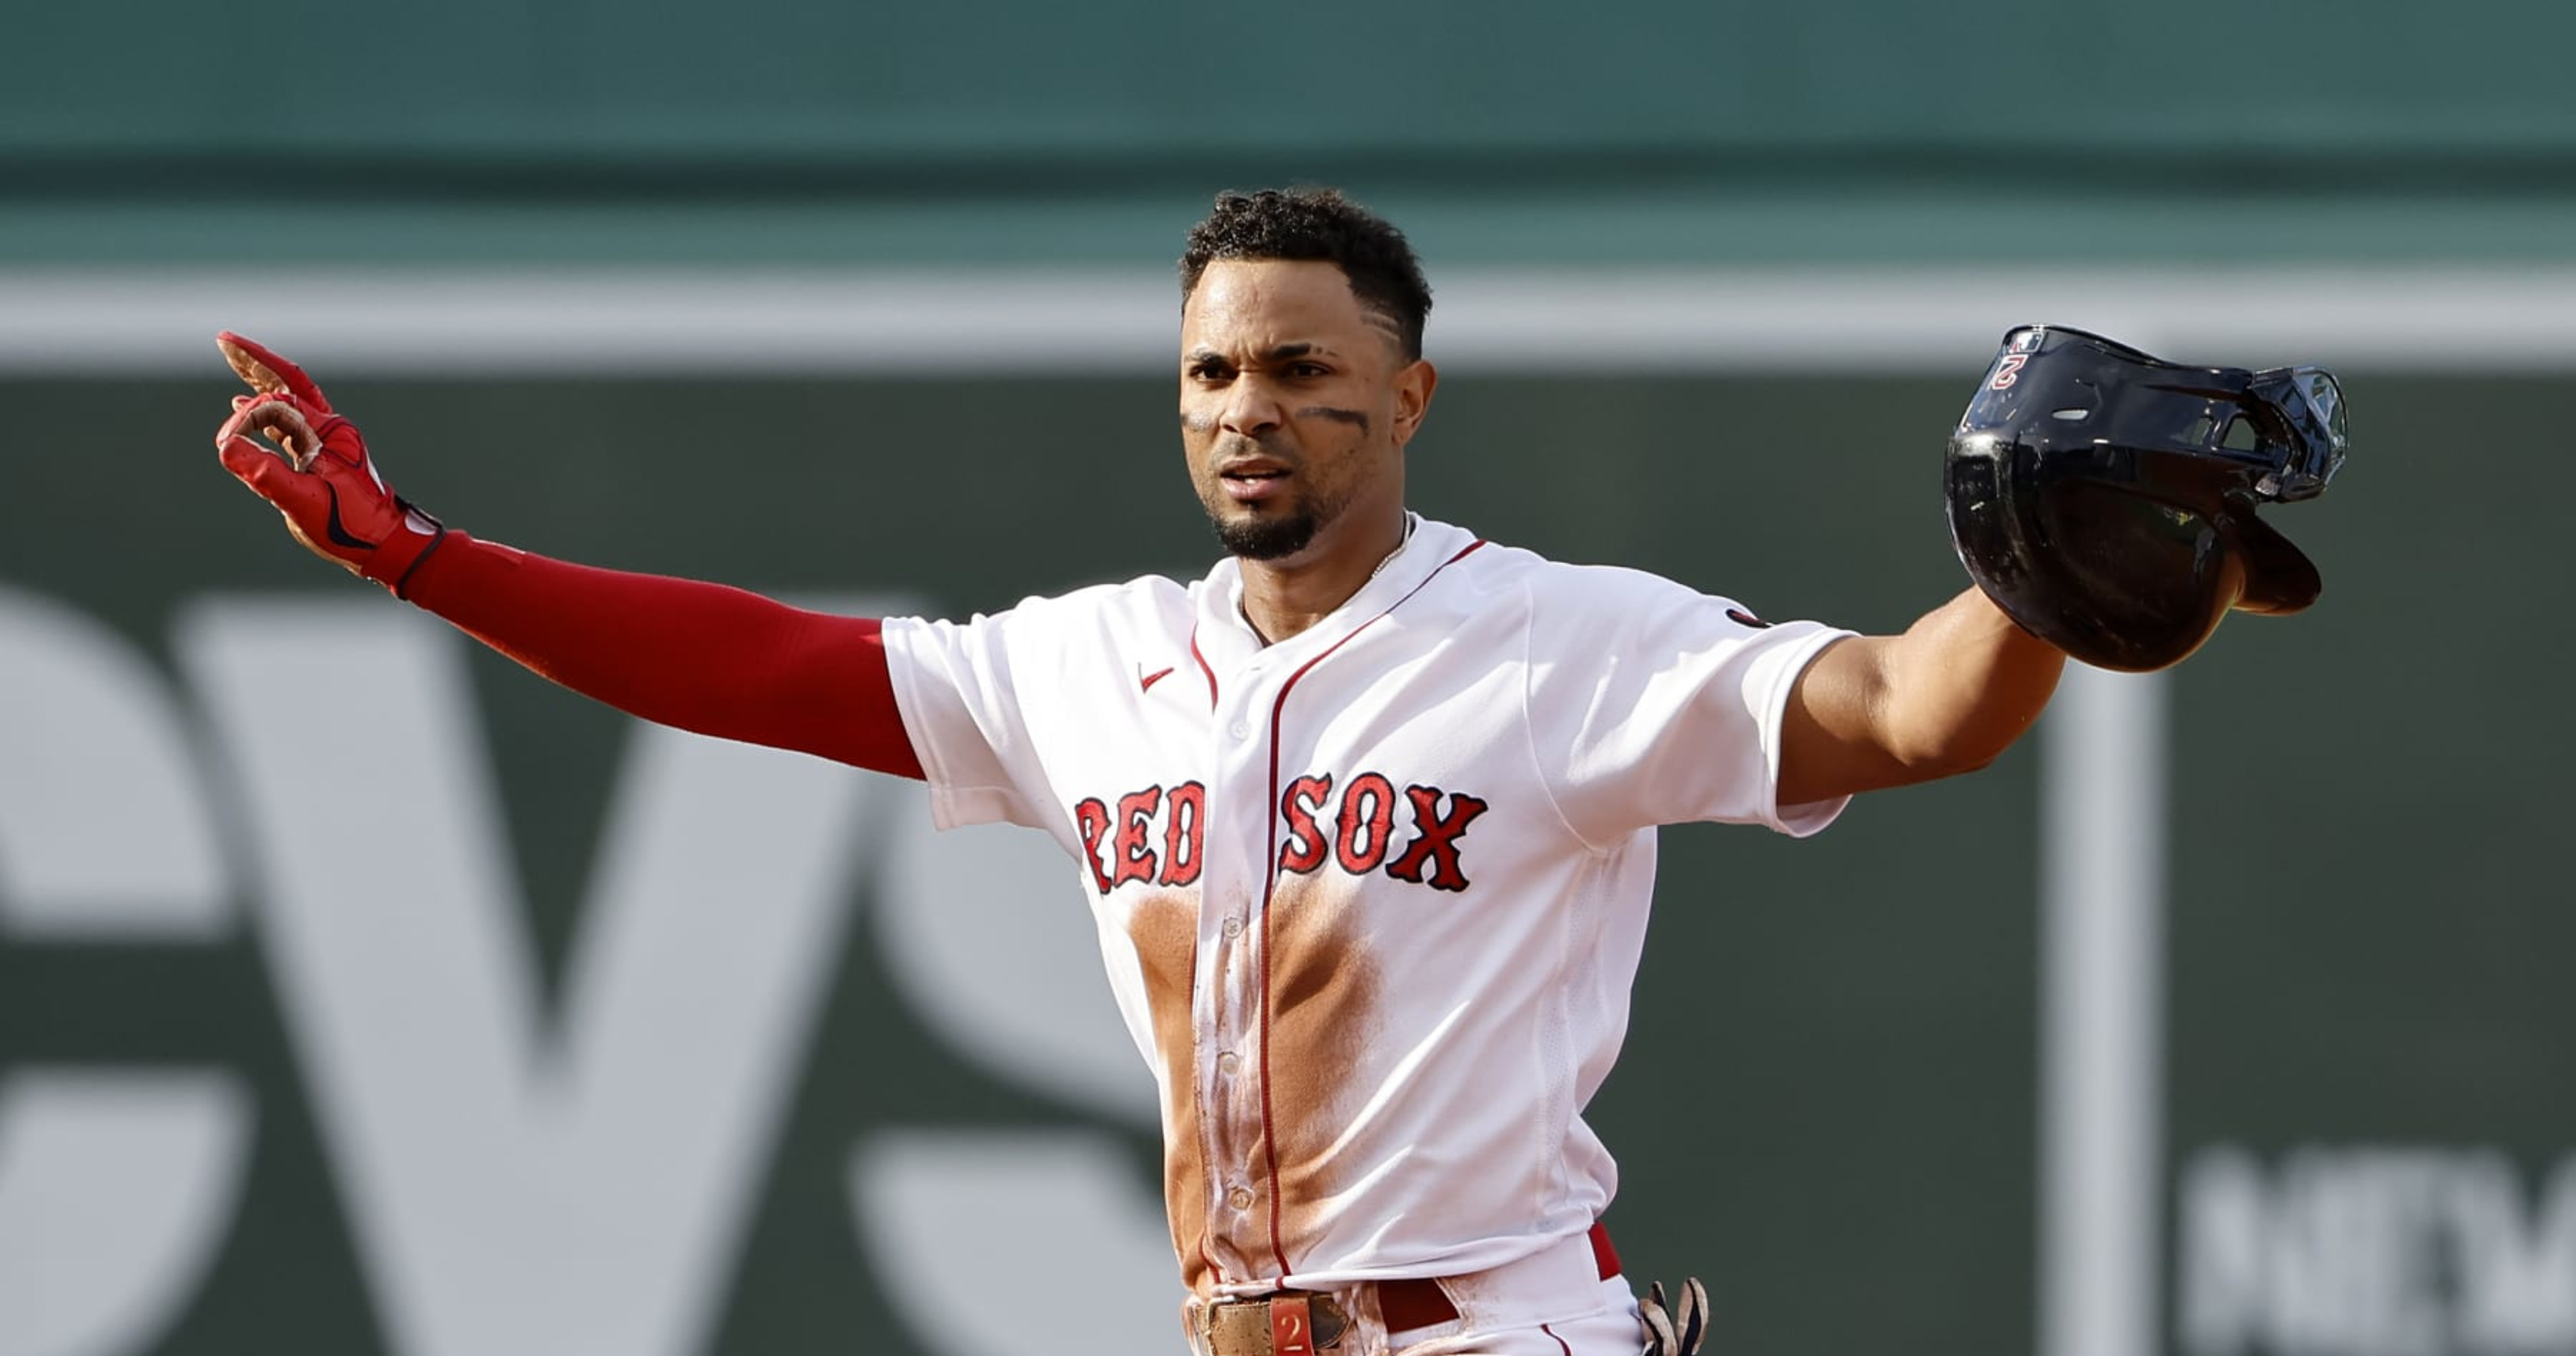 I don't know what's going on': Inside Xander Bogaerts's